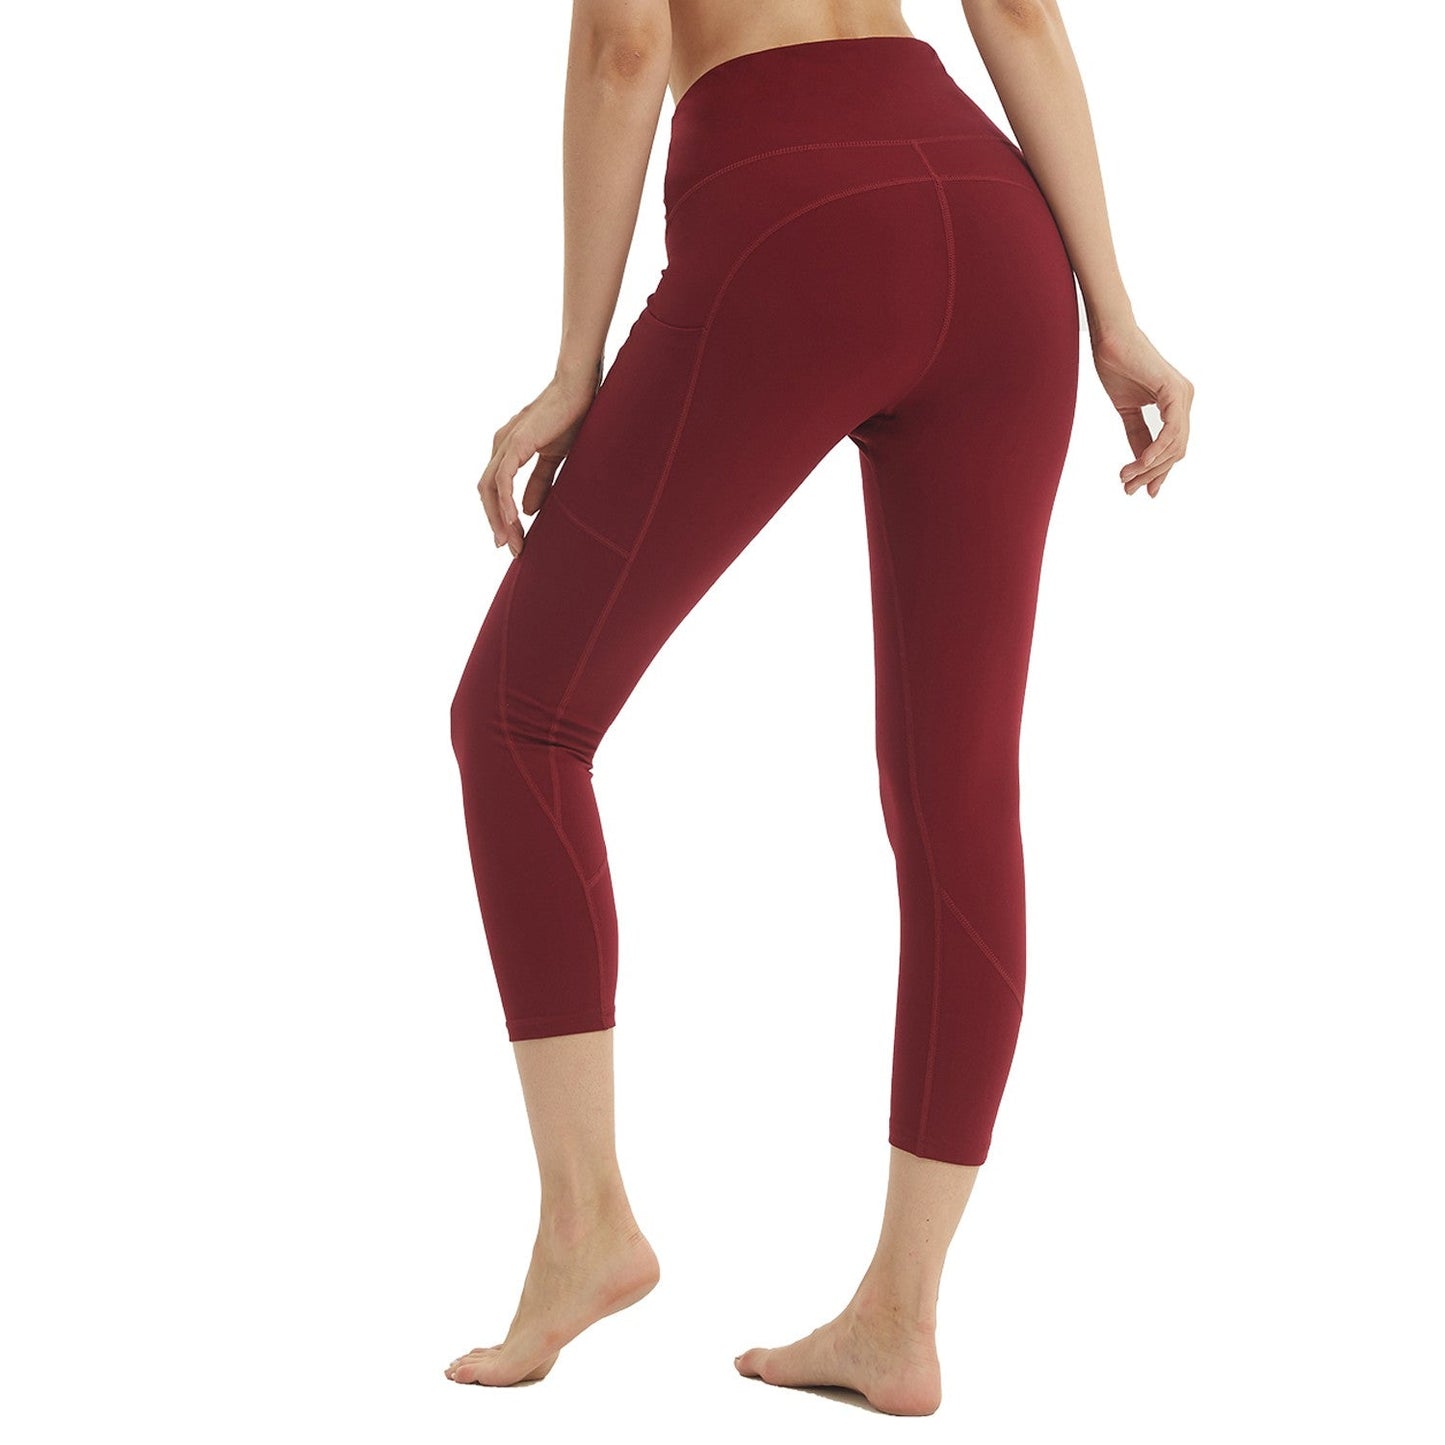 Women's High Waisted Yoga Capris with Pockets,Tummy Control Workout Sports  Running Capri Leggings - Red 